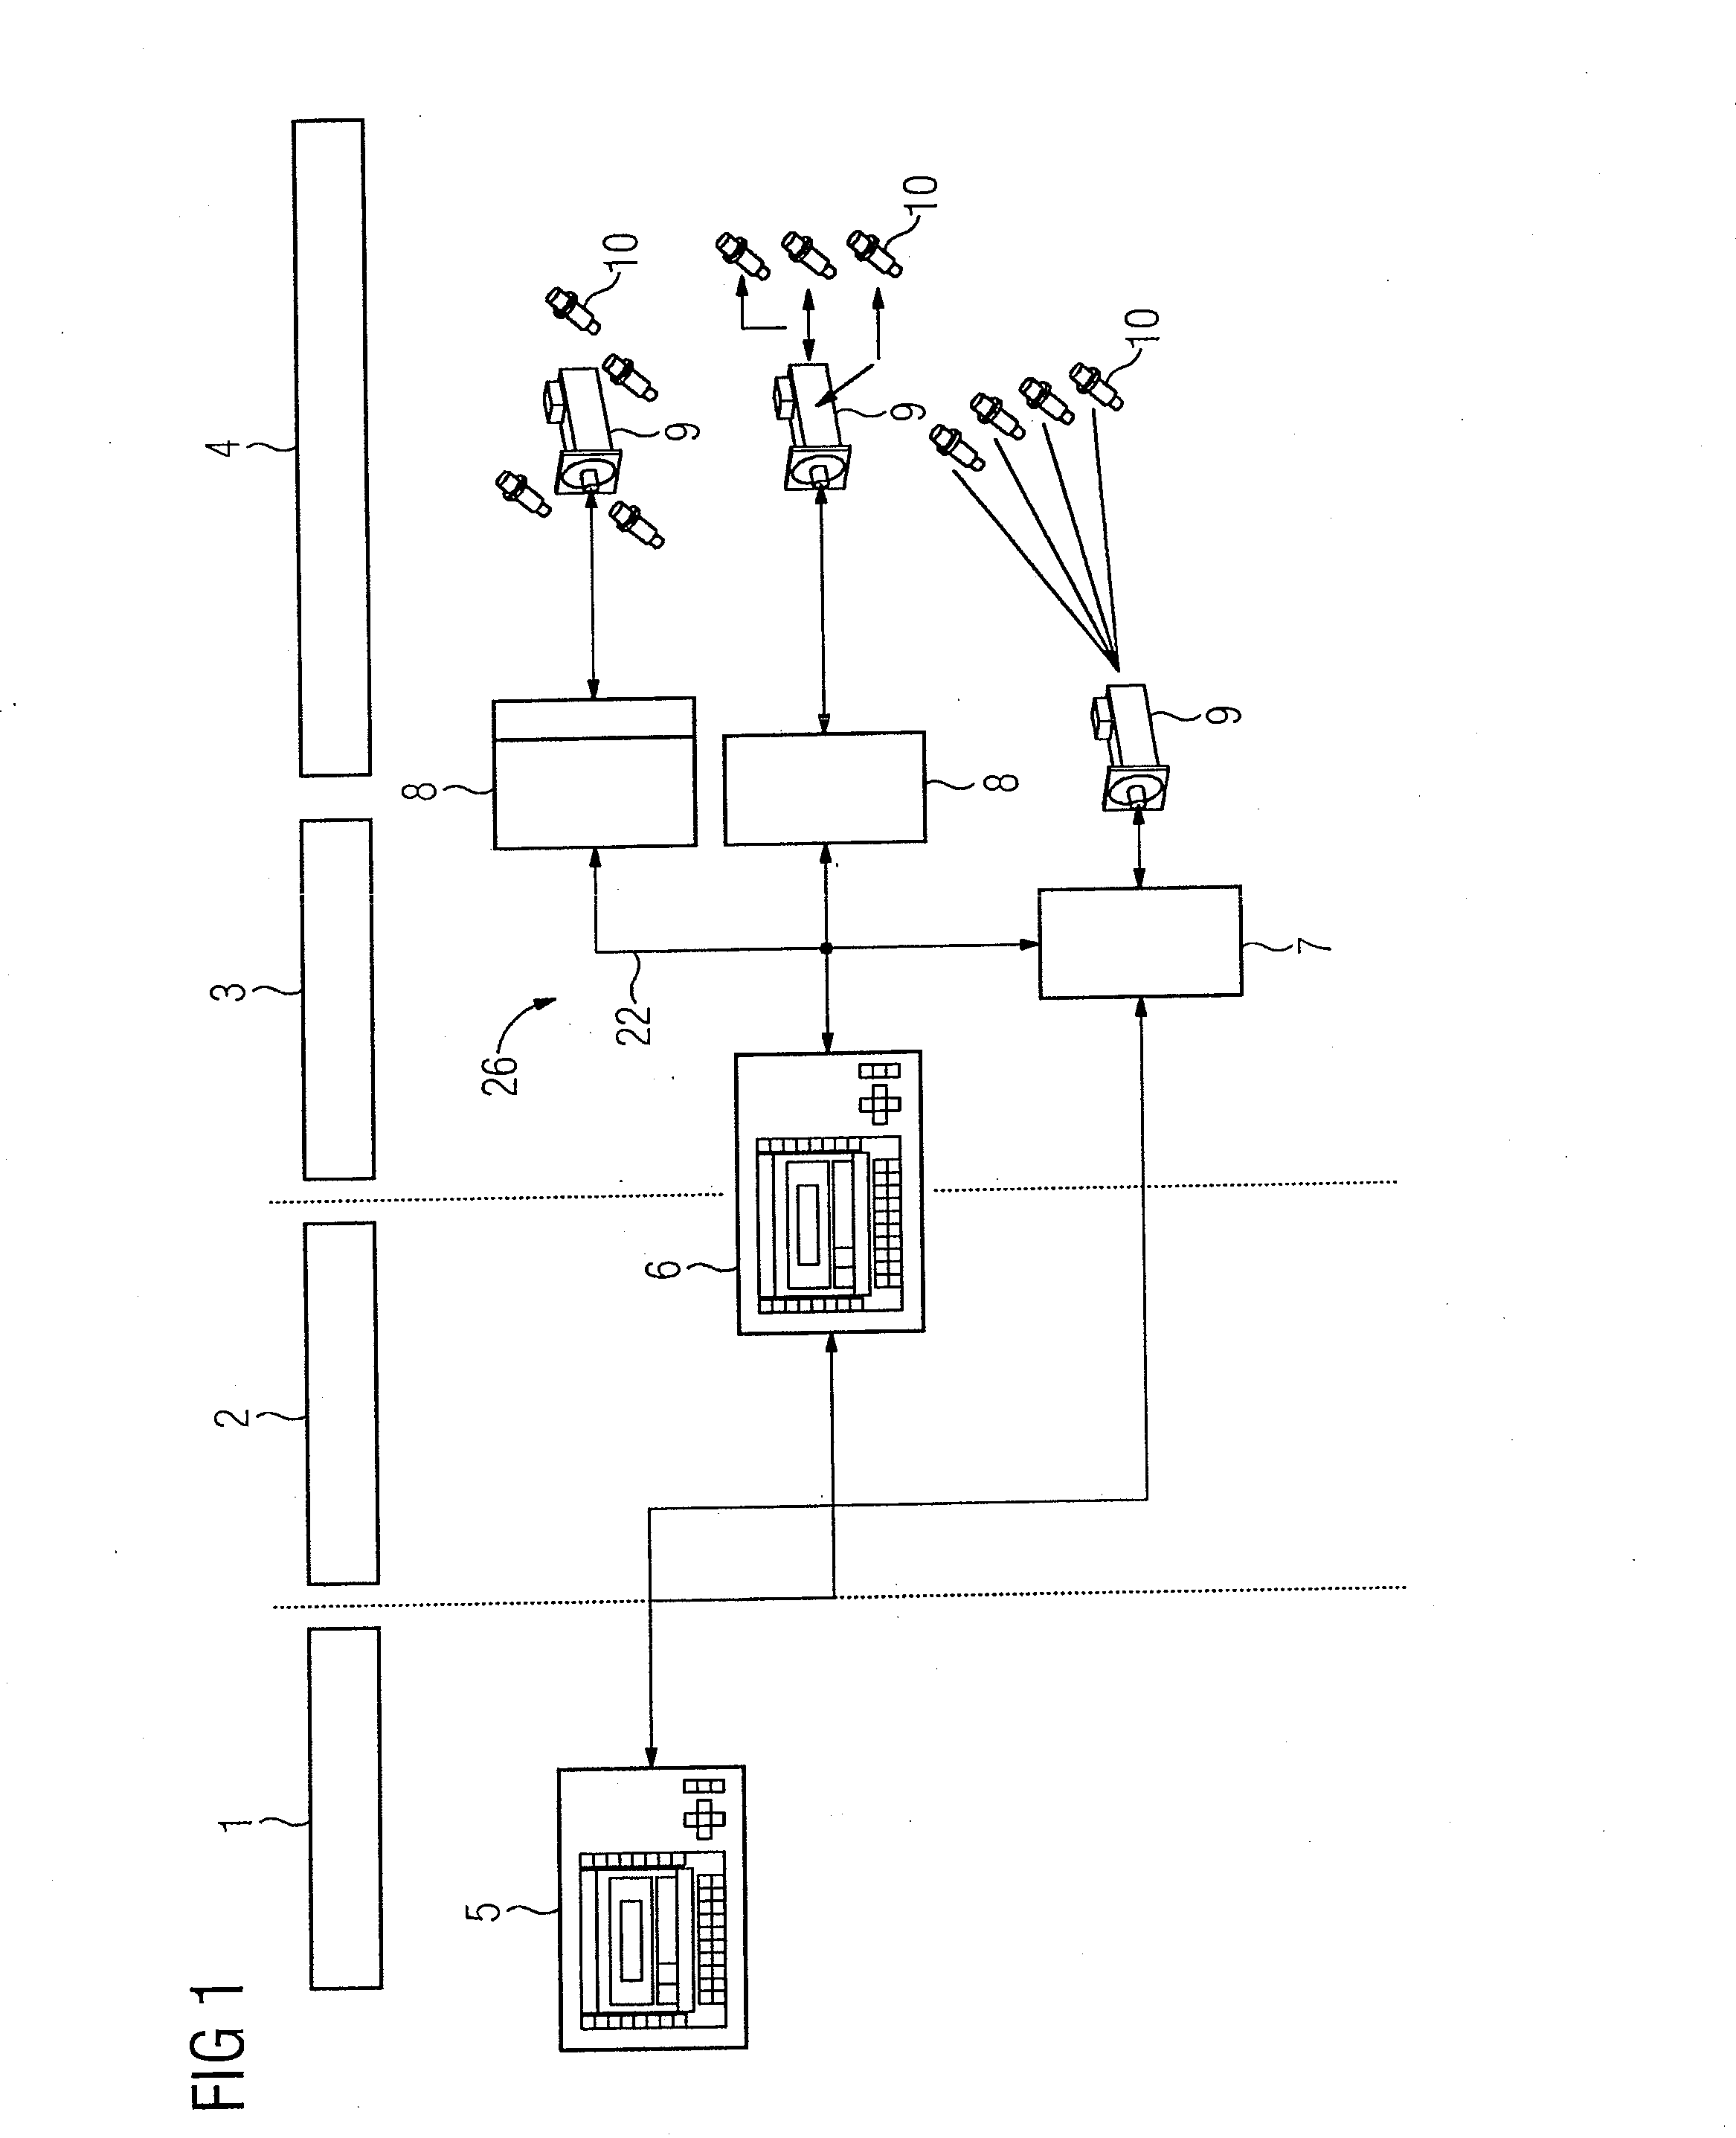 Method and Apparatus for Interchanging Data, and Network